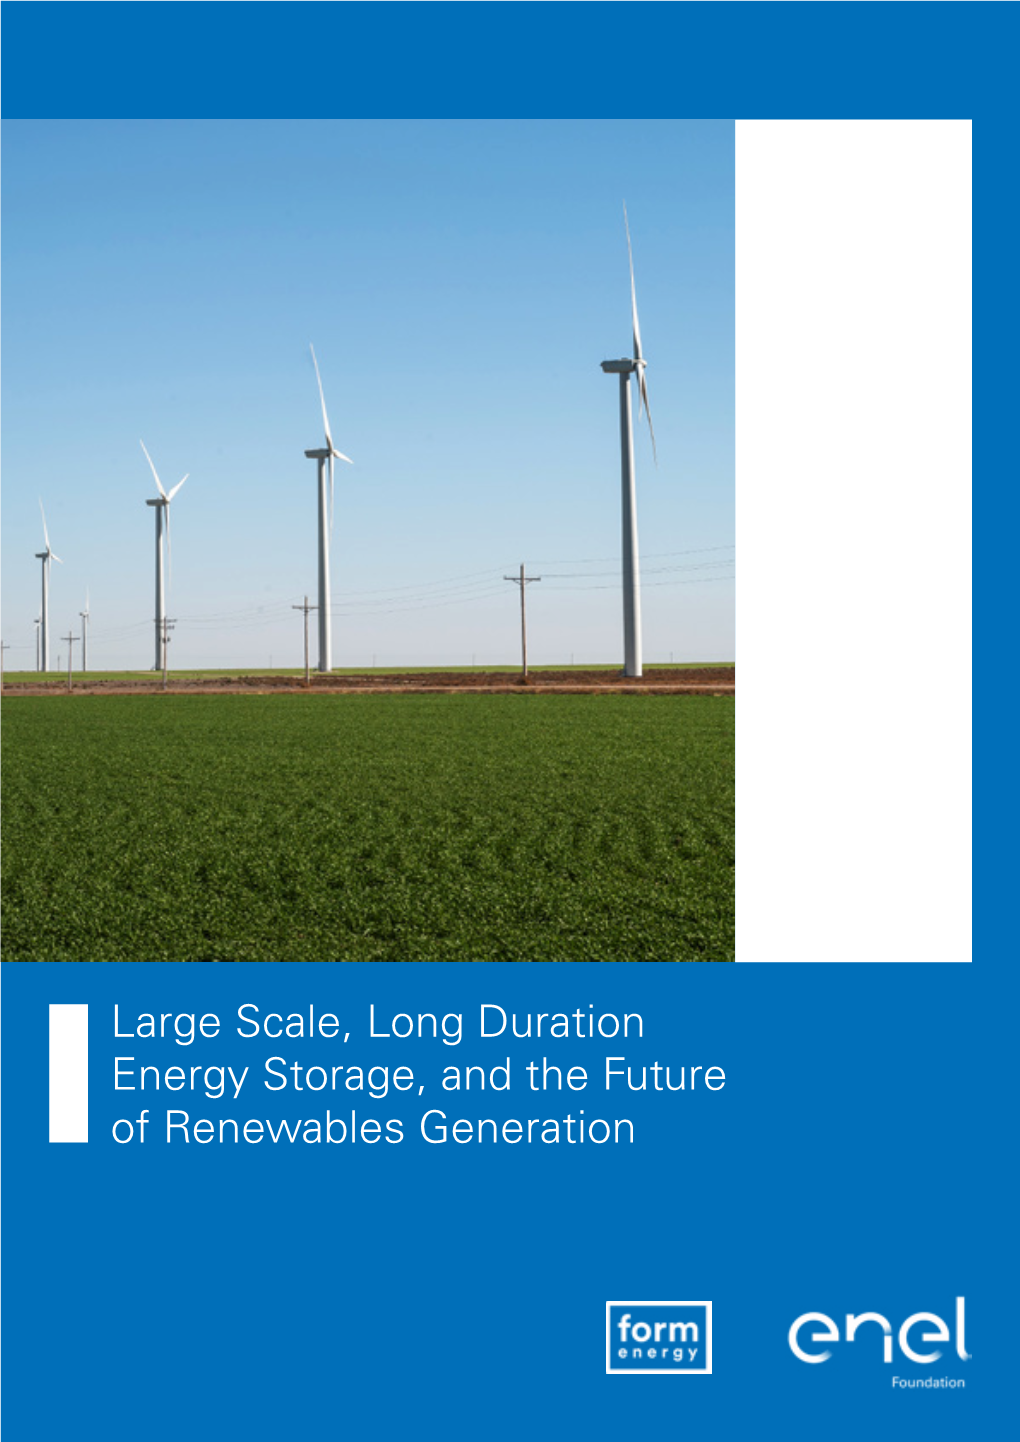 Large Scale, Long Duration Energy Storage, and the Future of Renewables Generation